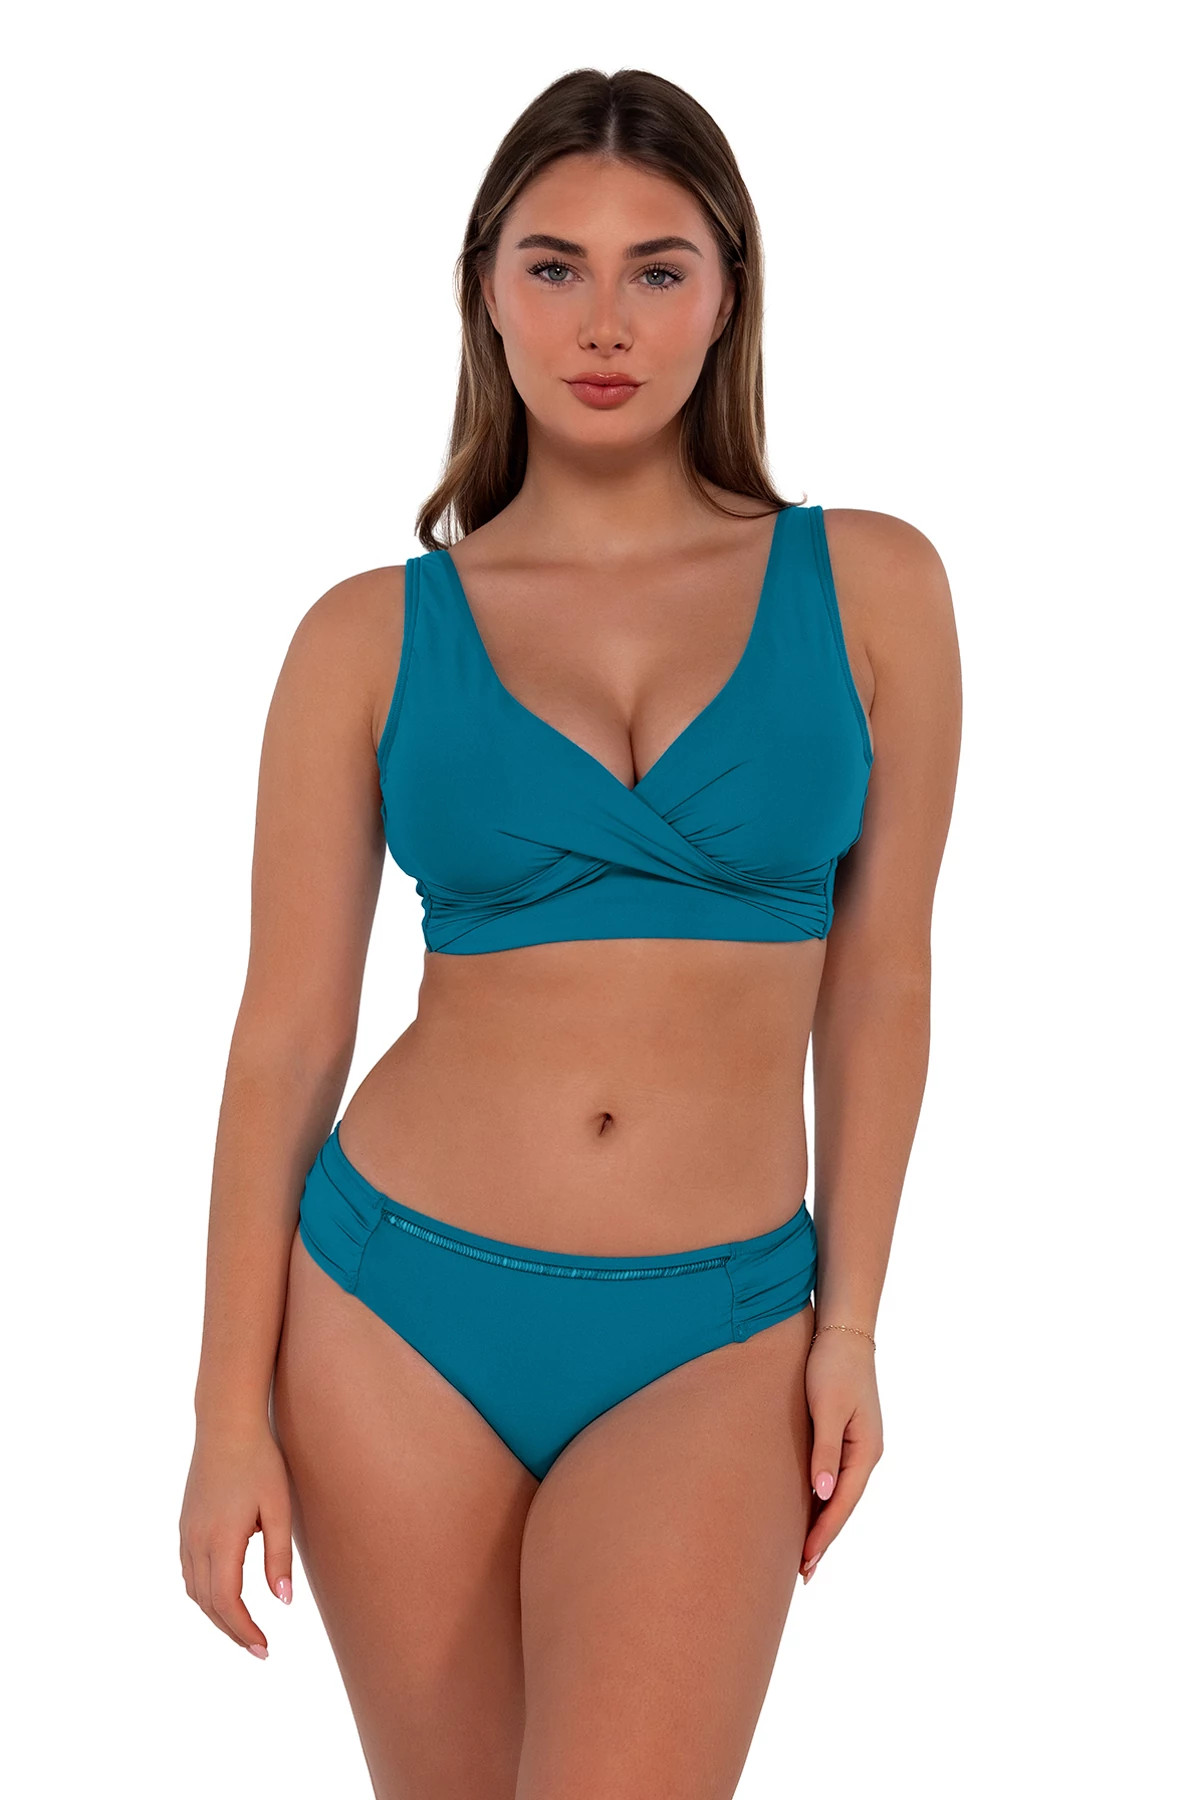 AVALON TEAL Elsie Underwire Bralette Bikini Top (E-H Cup) image number 1